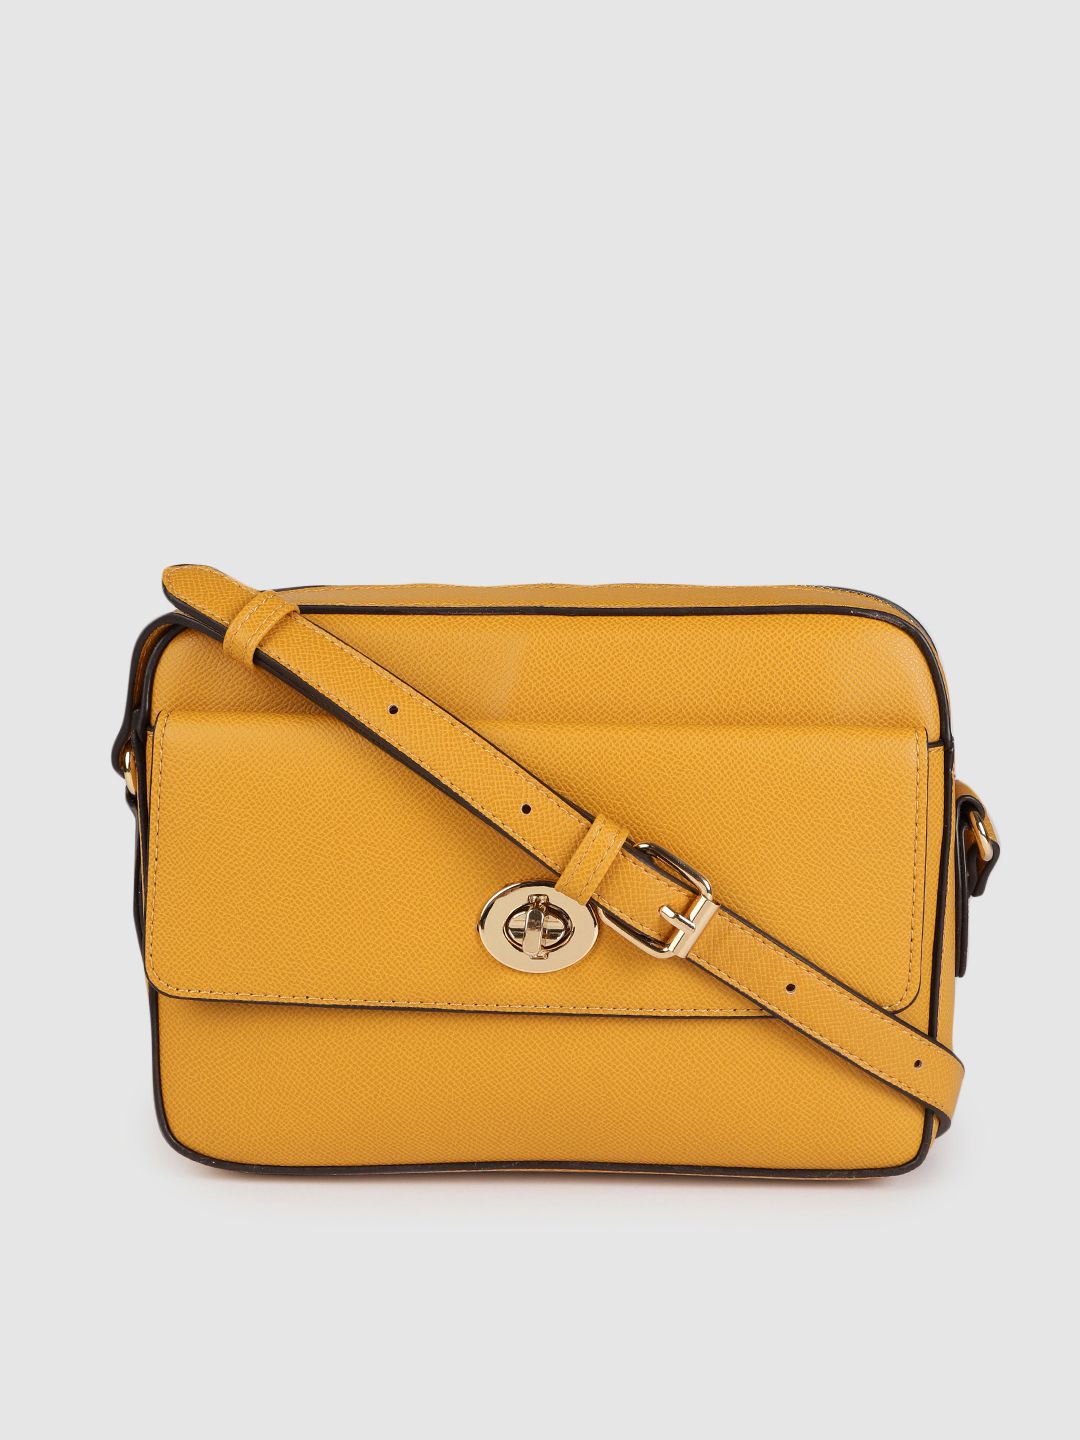 Accessorize Mustard Yellow Solid Structured Sling Bag Price in India